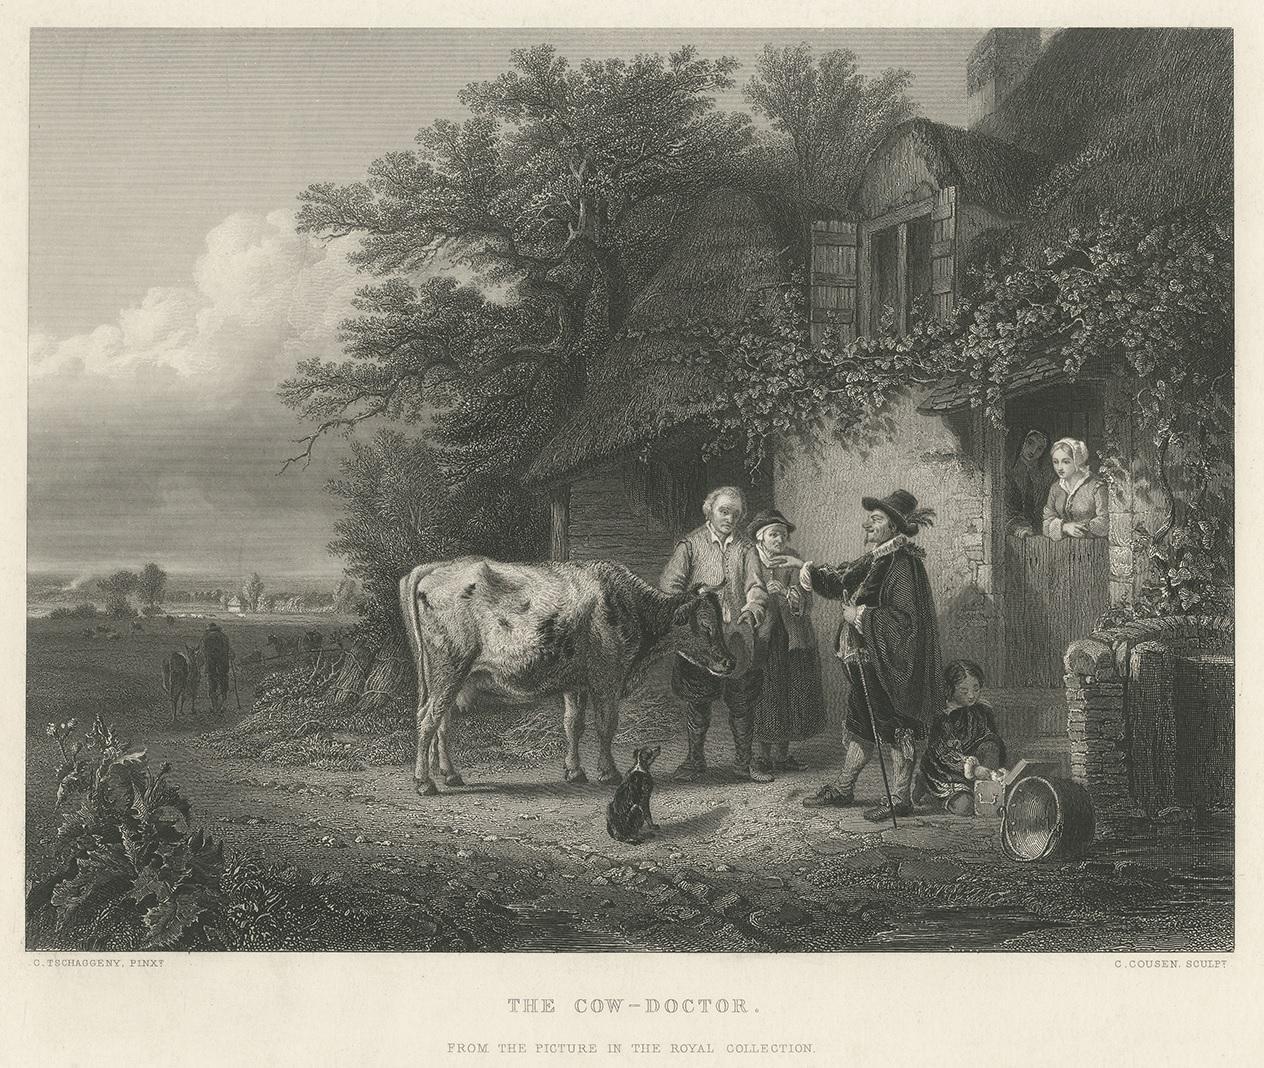 Antique print titled 'The Cow-Doctor'. Steel engraving of a cow doctor, standing outside a rural cottage and pointing to an ailing cow, observed by its anxious owners. Engraved by C. Cousen after the 1845 painting by Edmond Tschaggeny, then in the